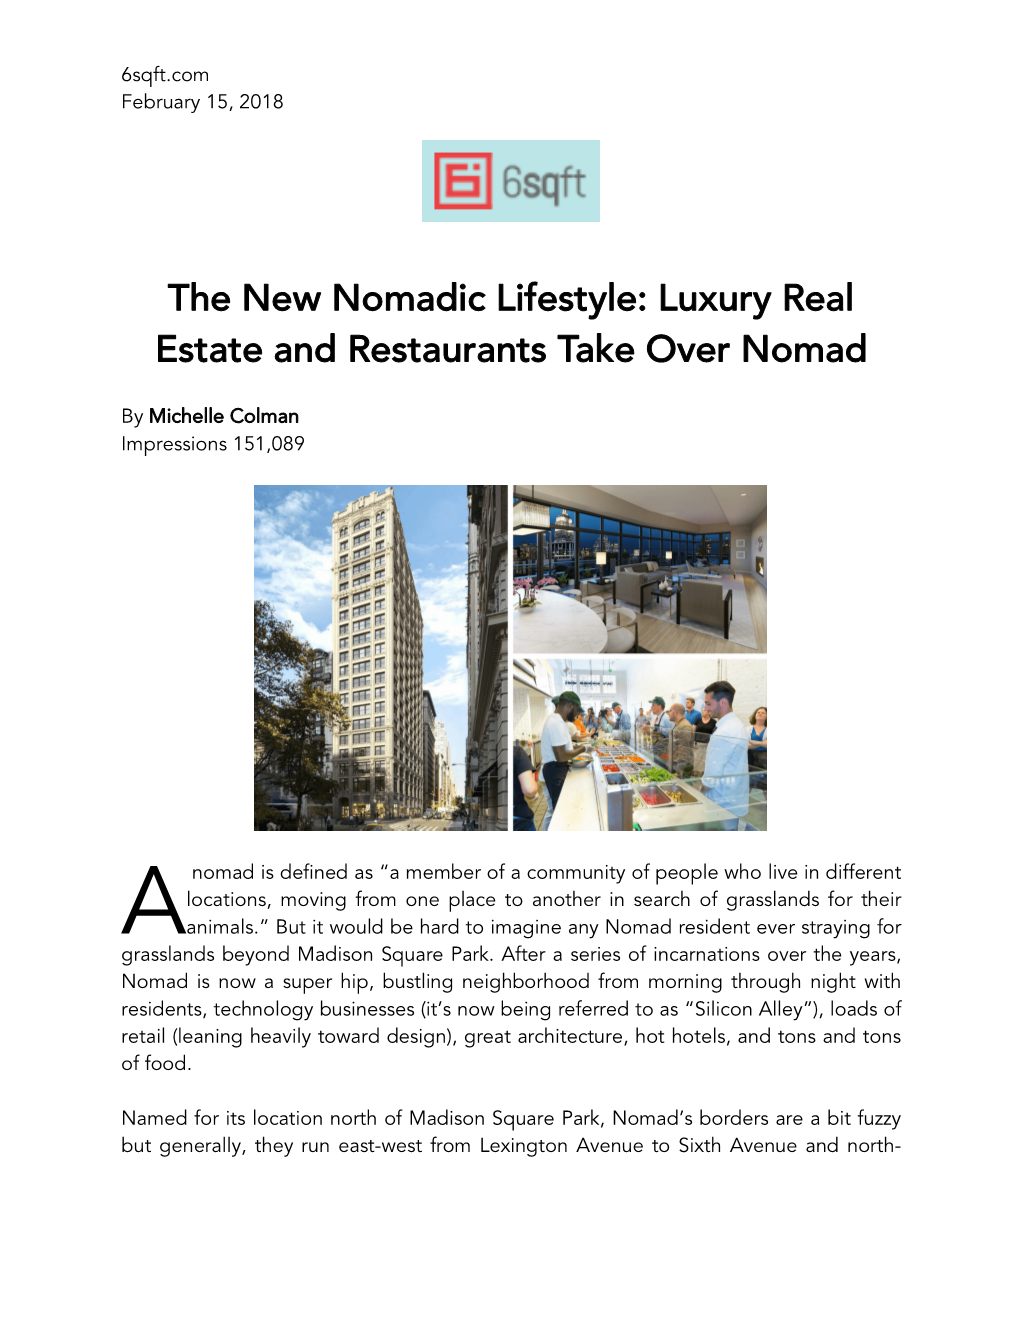 The New Nomadic Lifestyle: Luxury Real Estate and Restaurants Take Over Nomad